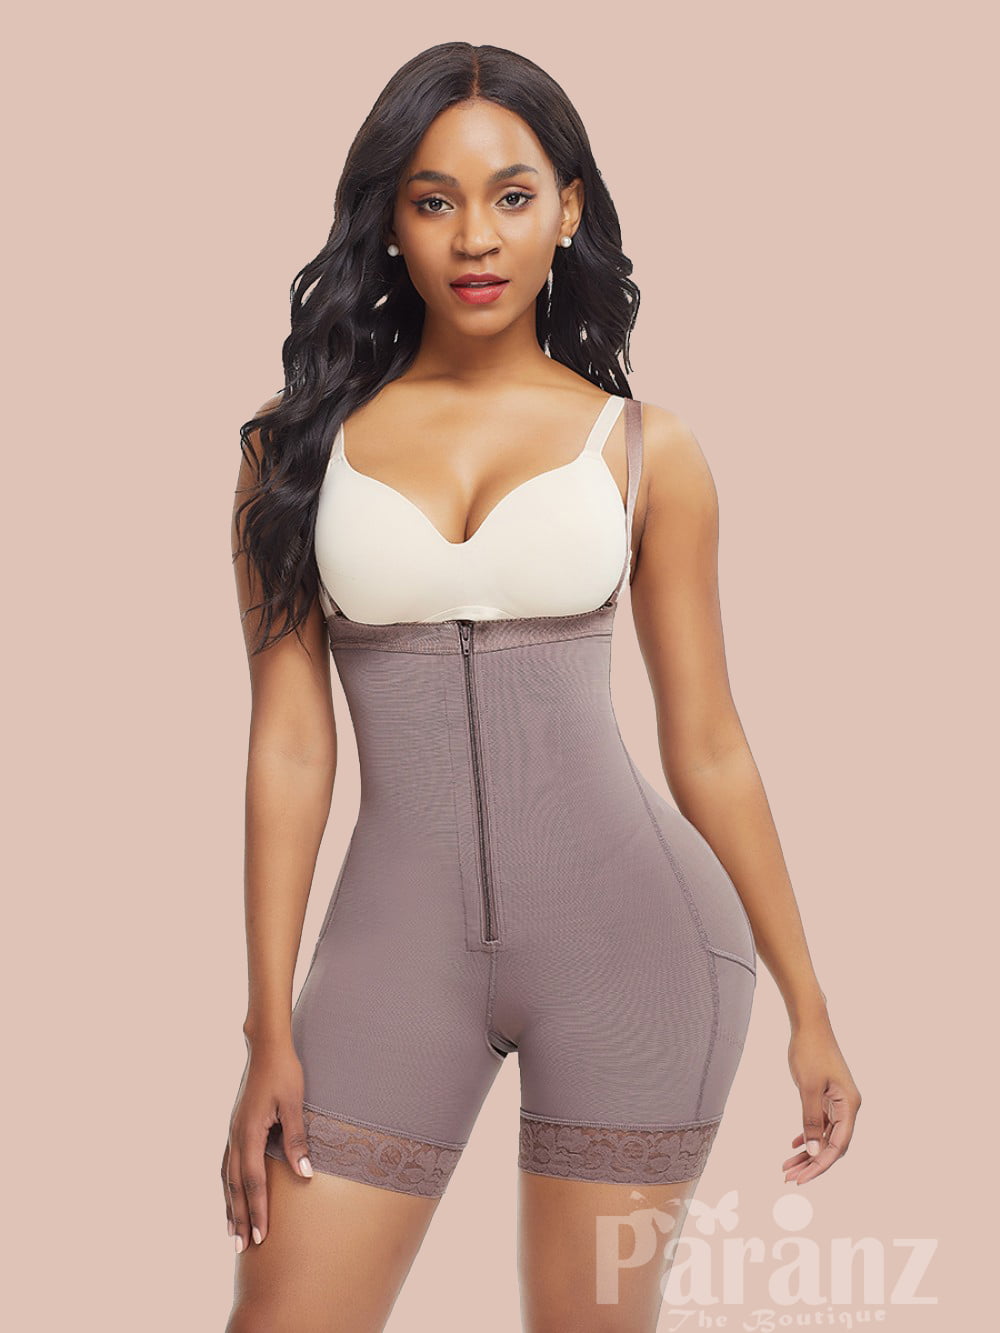 Waist Trainer For Women Under Clothes Underbust Segmented Corsets Cincher  Invisible Seamless Hourglass Shapewear - Intimates - AliExpress